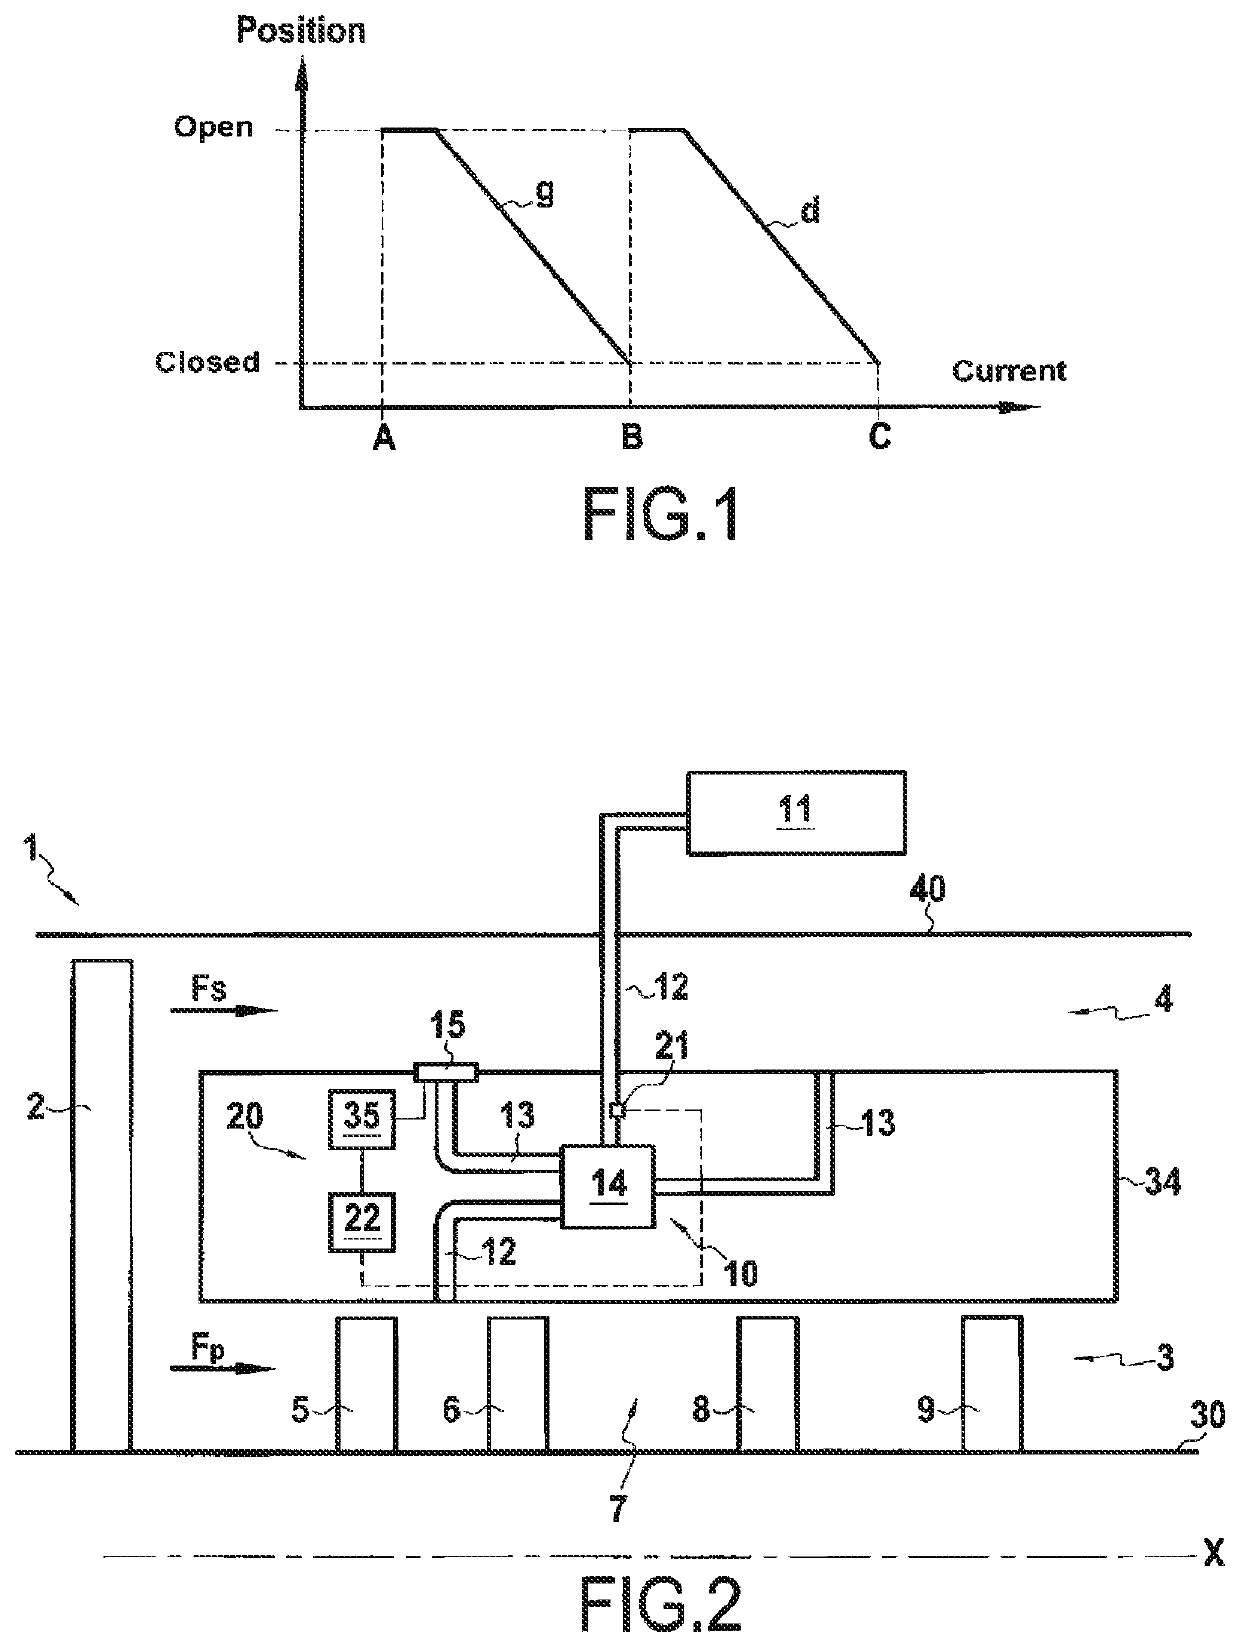 Unit for controlling a controlled valve for abstracting an airflow from a pressurized airflow of an aircraft